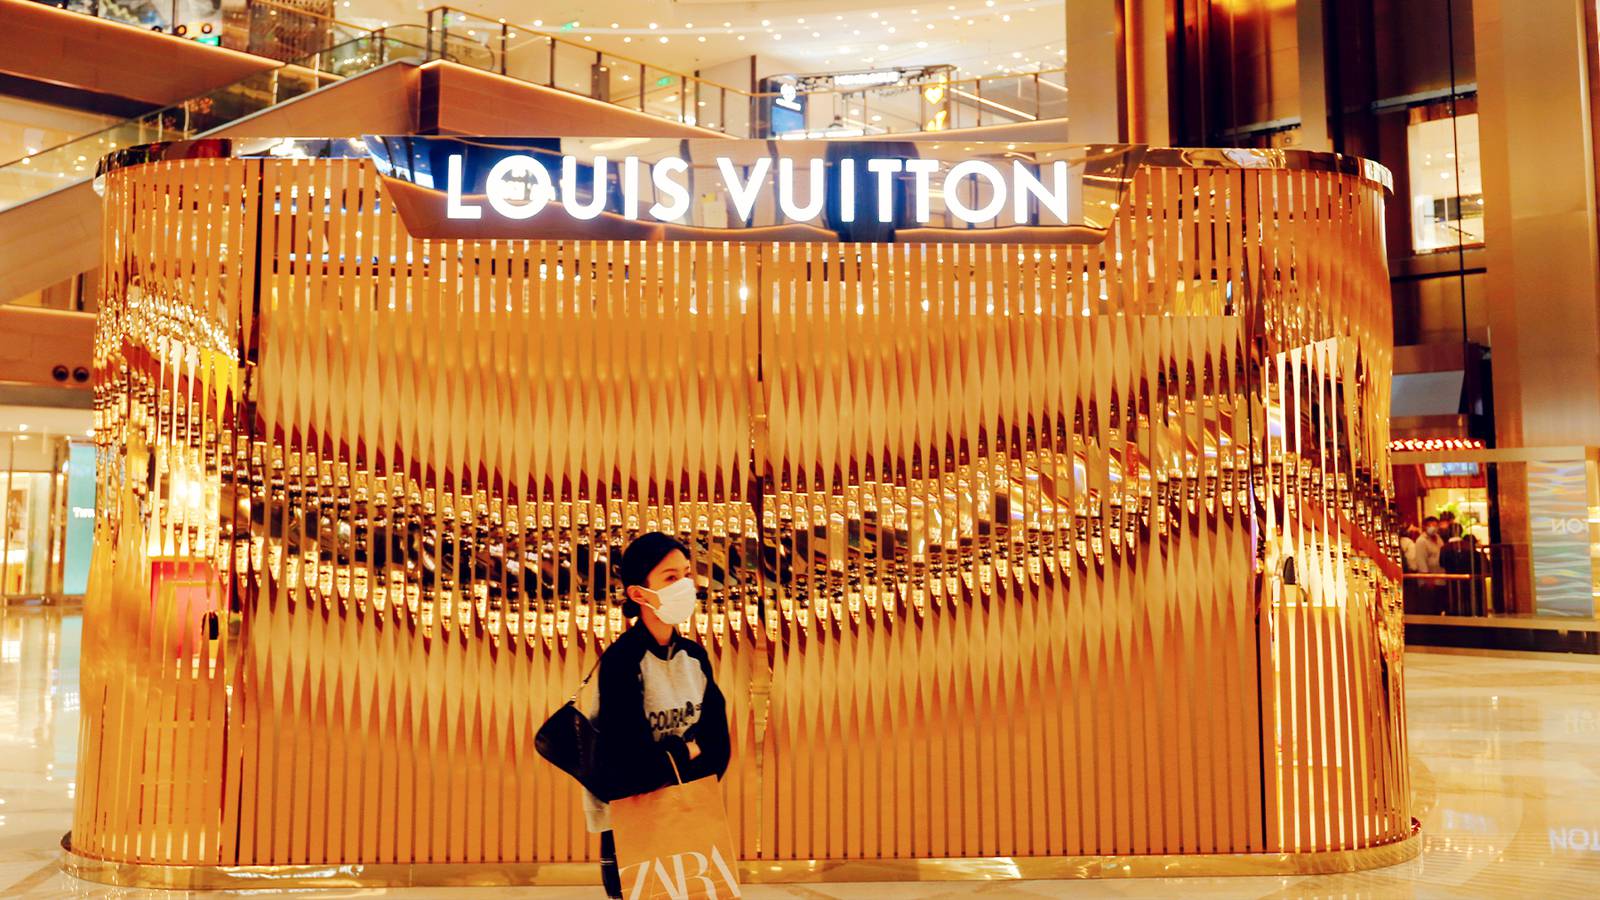 Louis Vuitton bag goes missing after purchase made by Mainland tourist at a  duty-free shop in France - Dimsum Daily